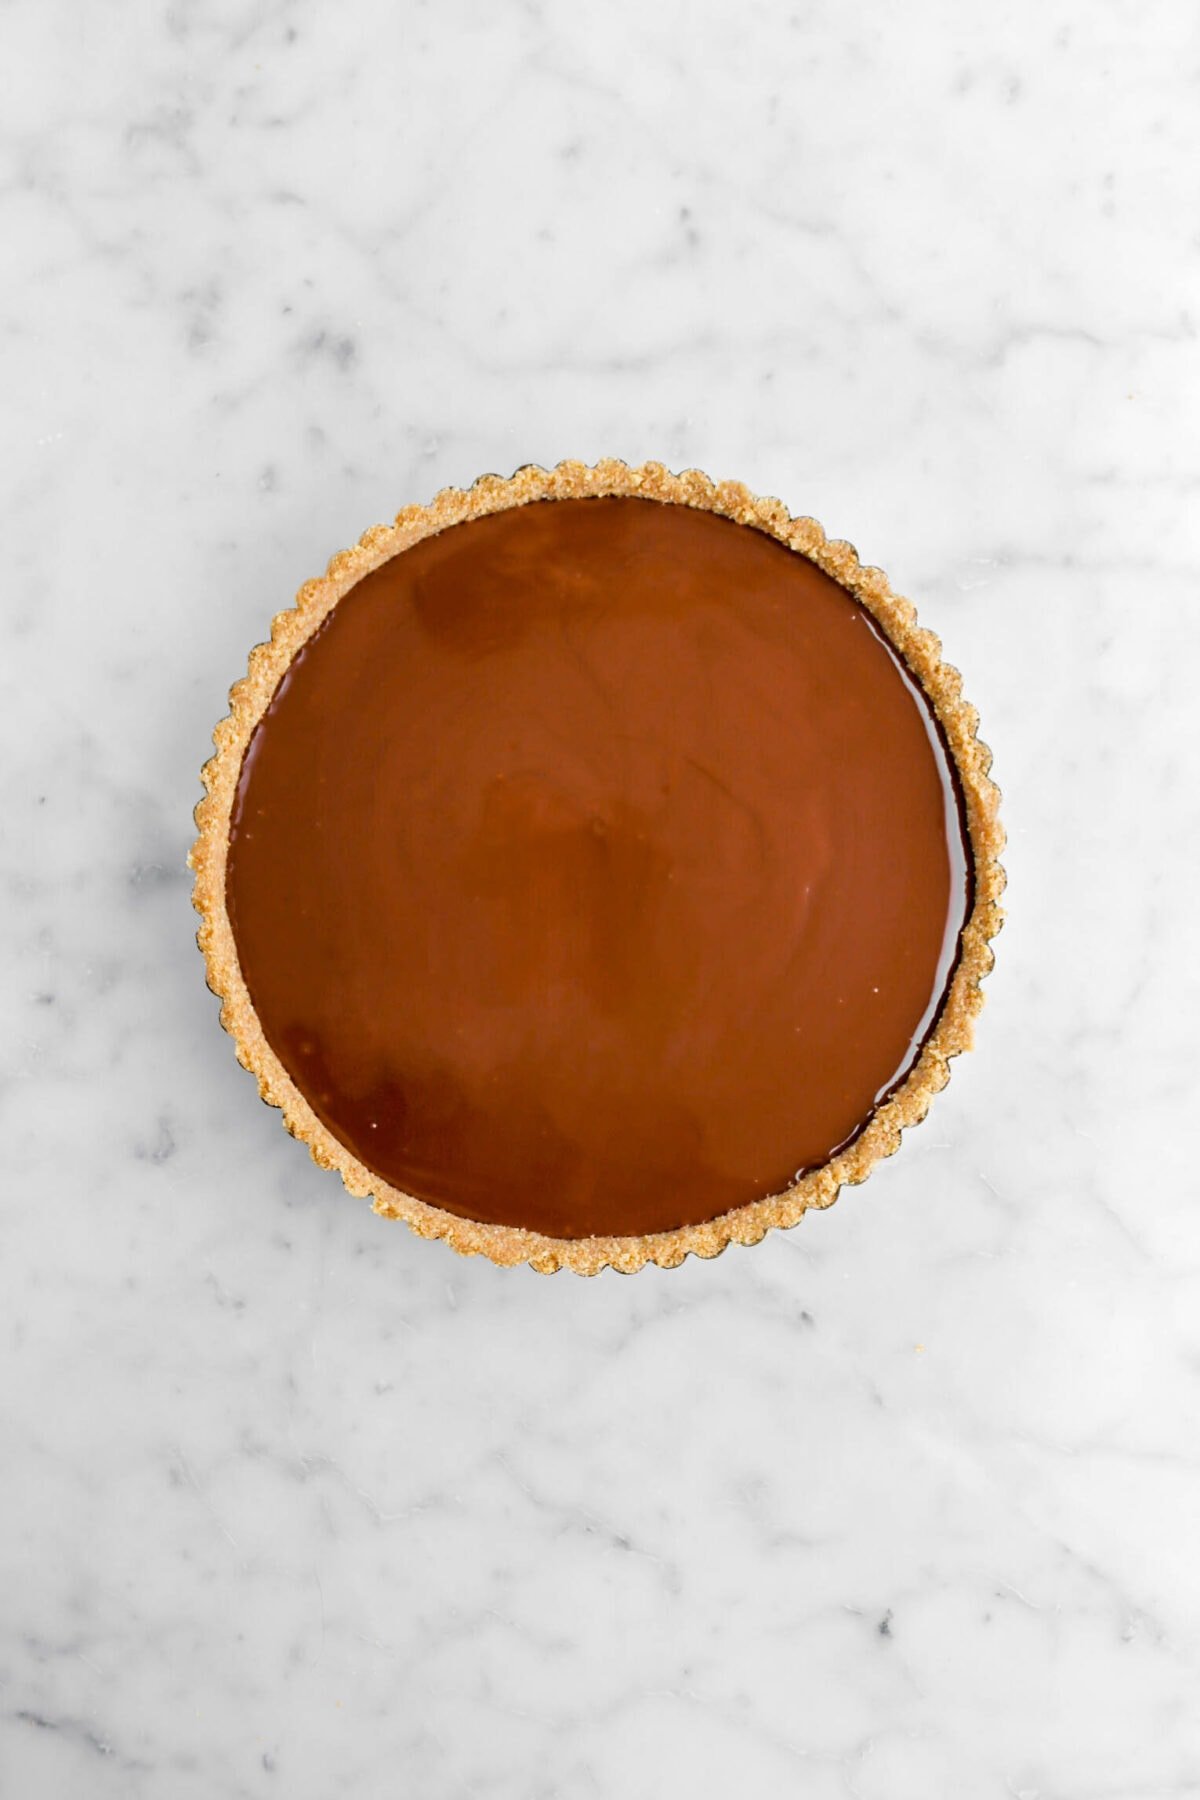 melted chocolate in graham cracker crust.